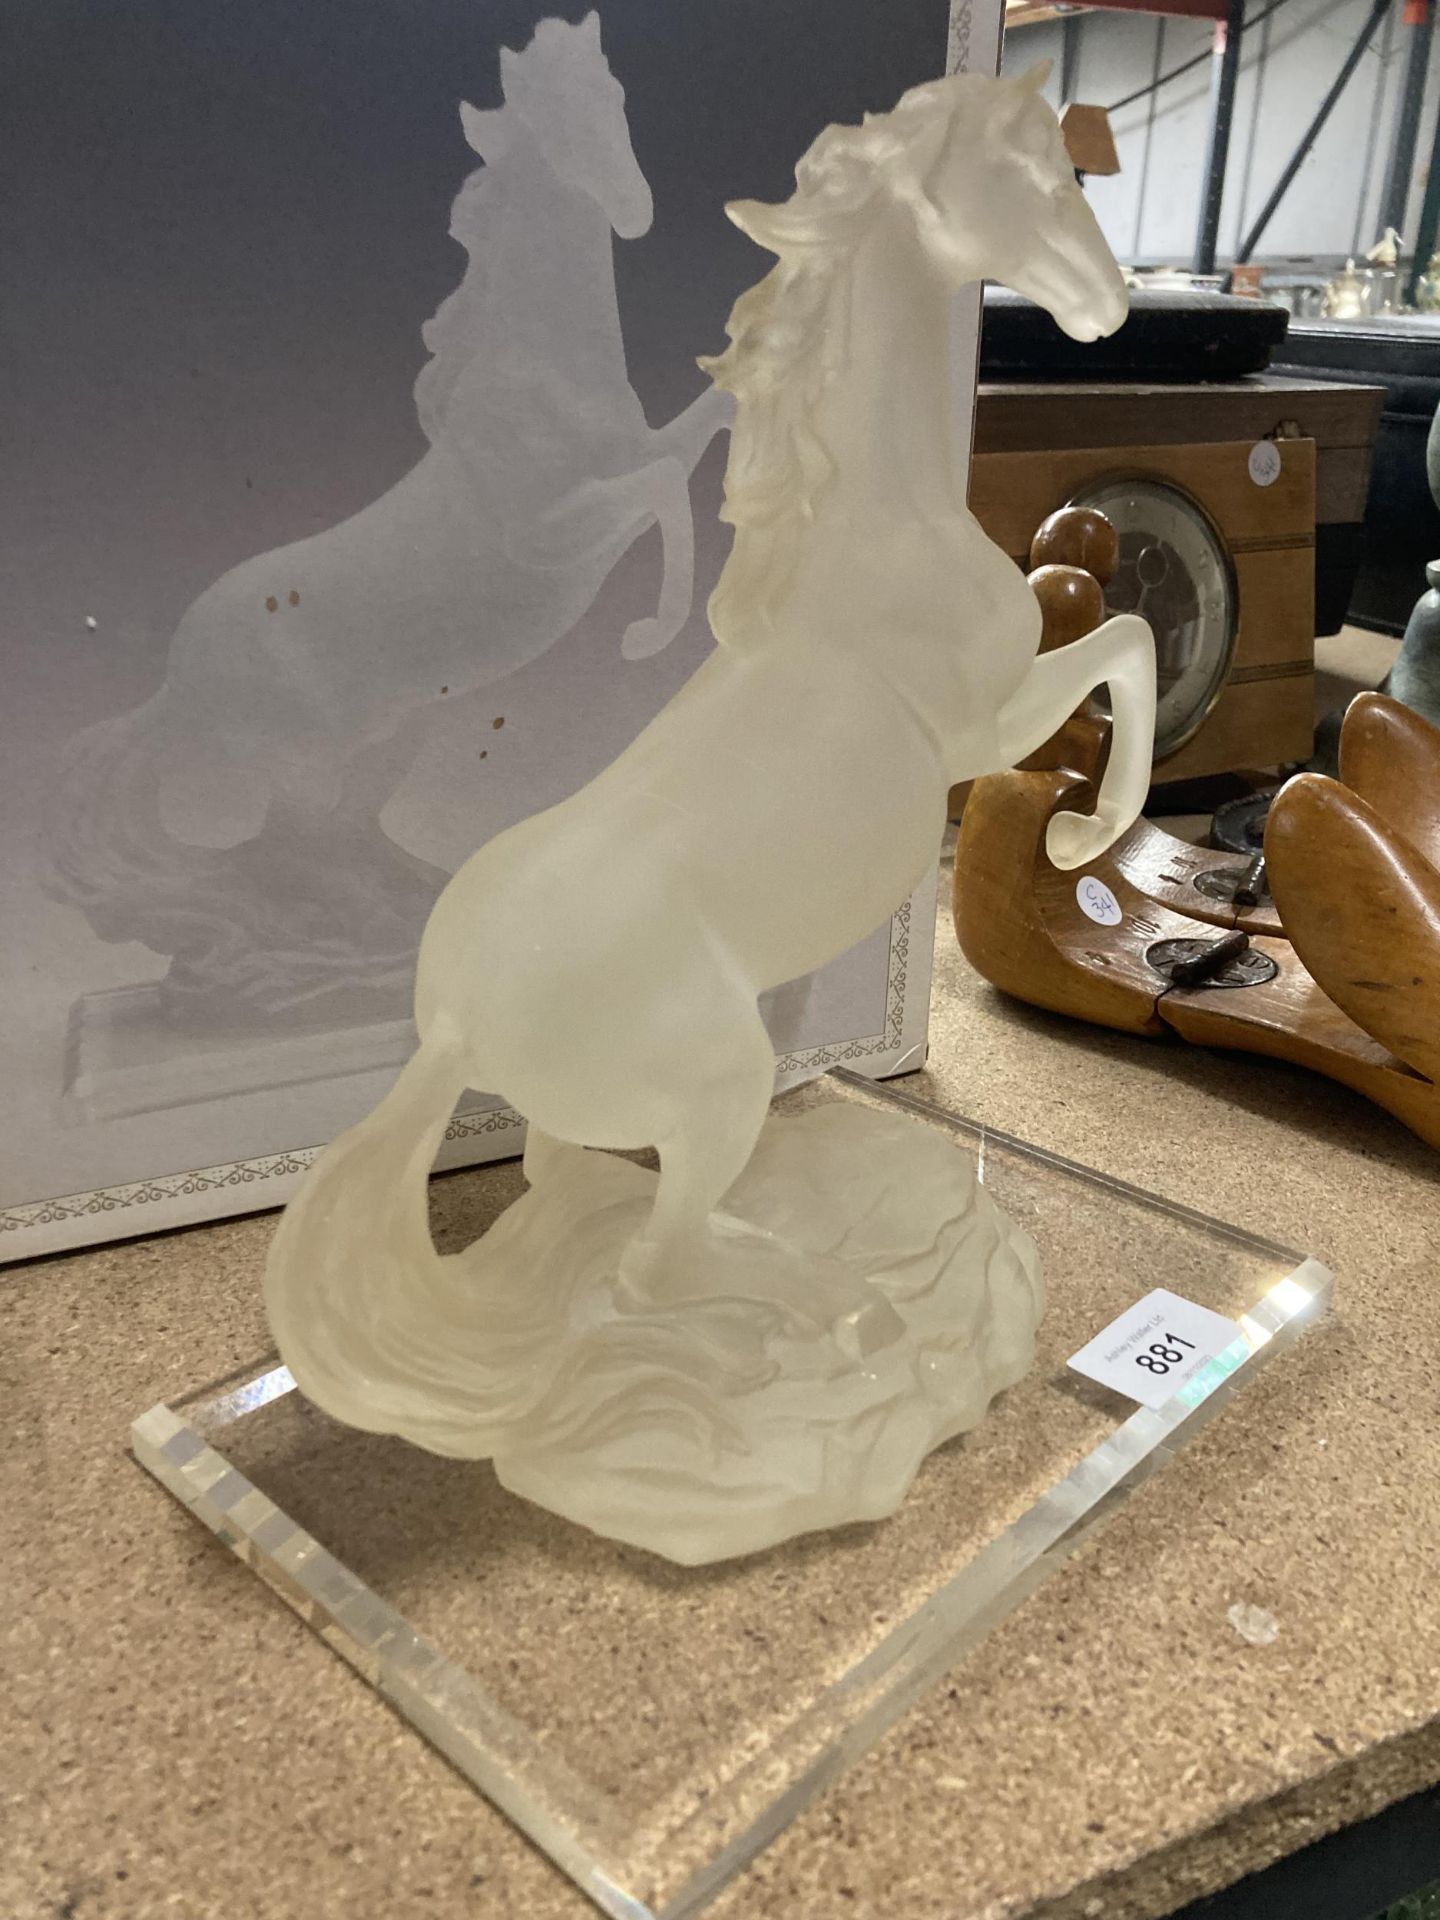 A BOXED REARING HORSE FIGURE FROM 'THE STARLIGHT COLLECTION' - Image 2 of 3